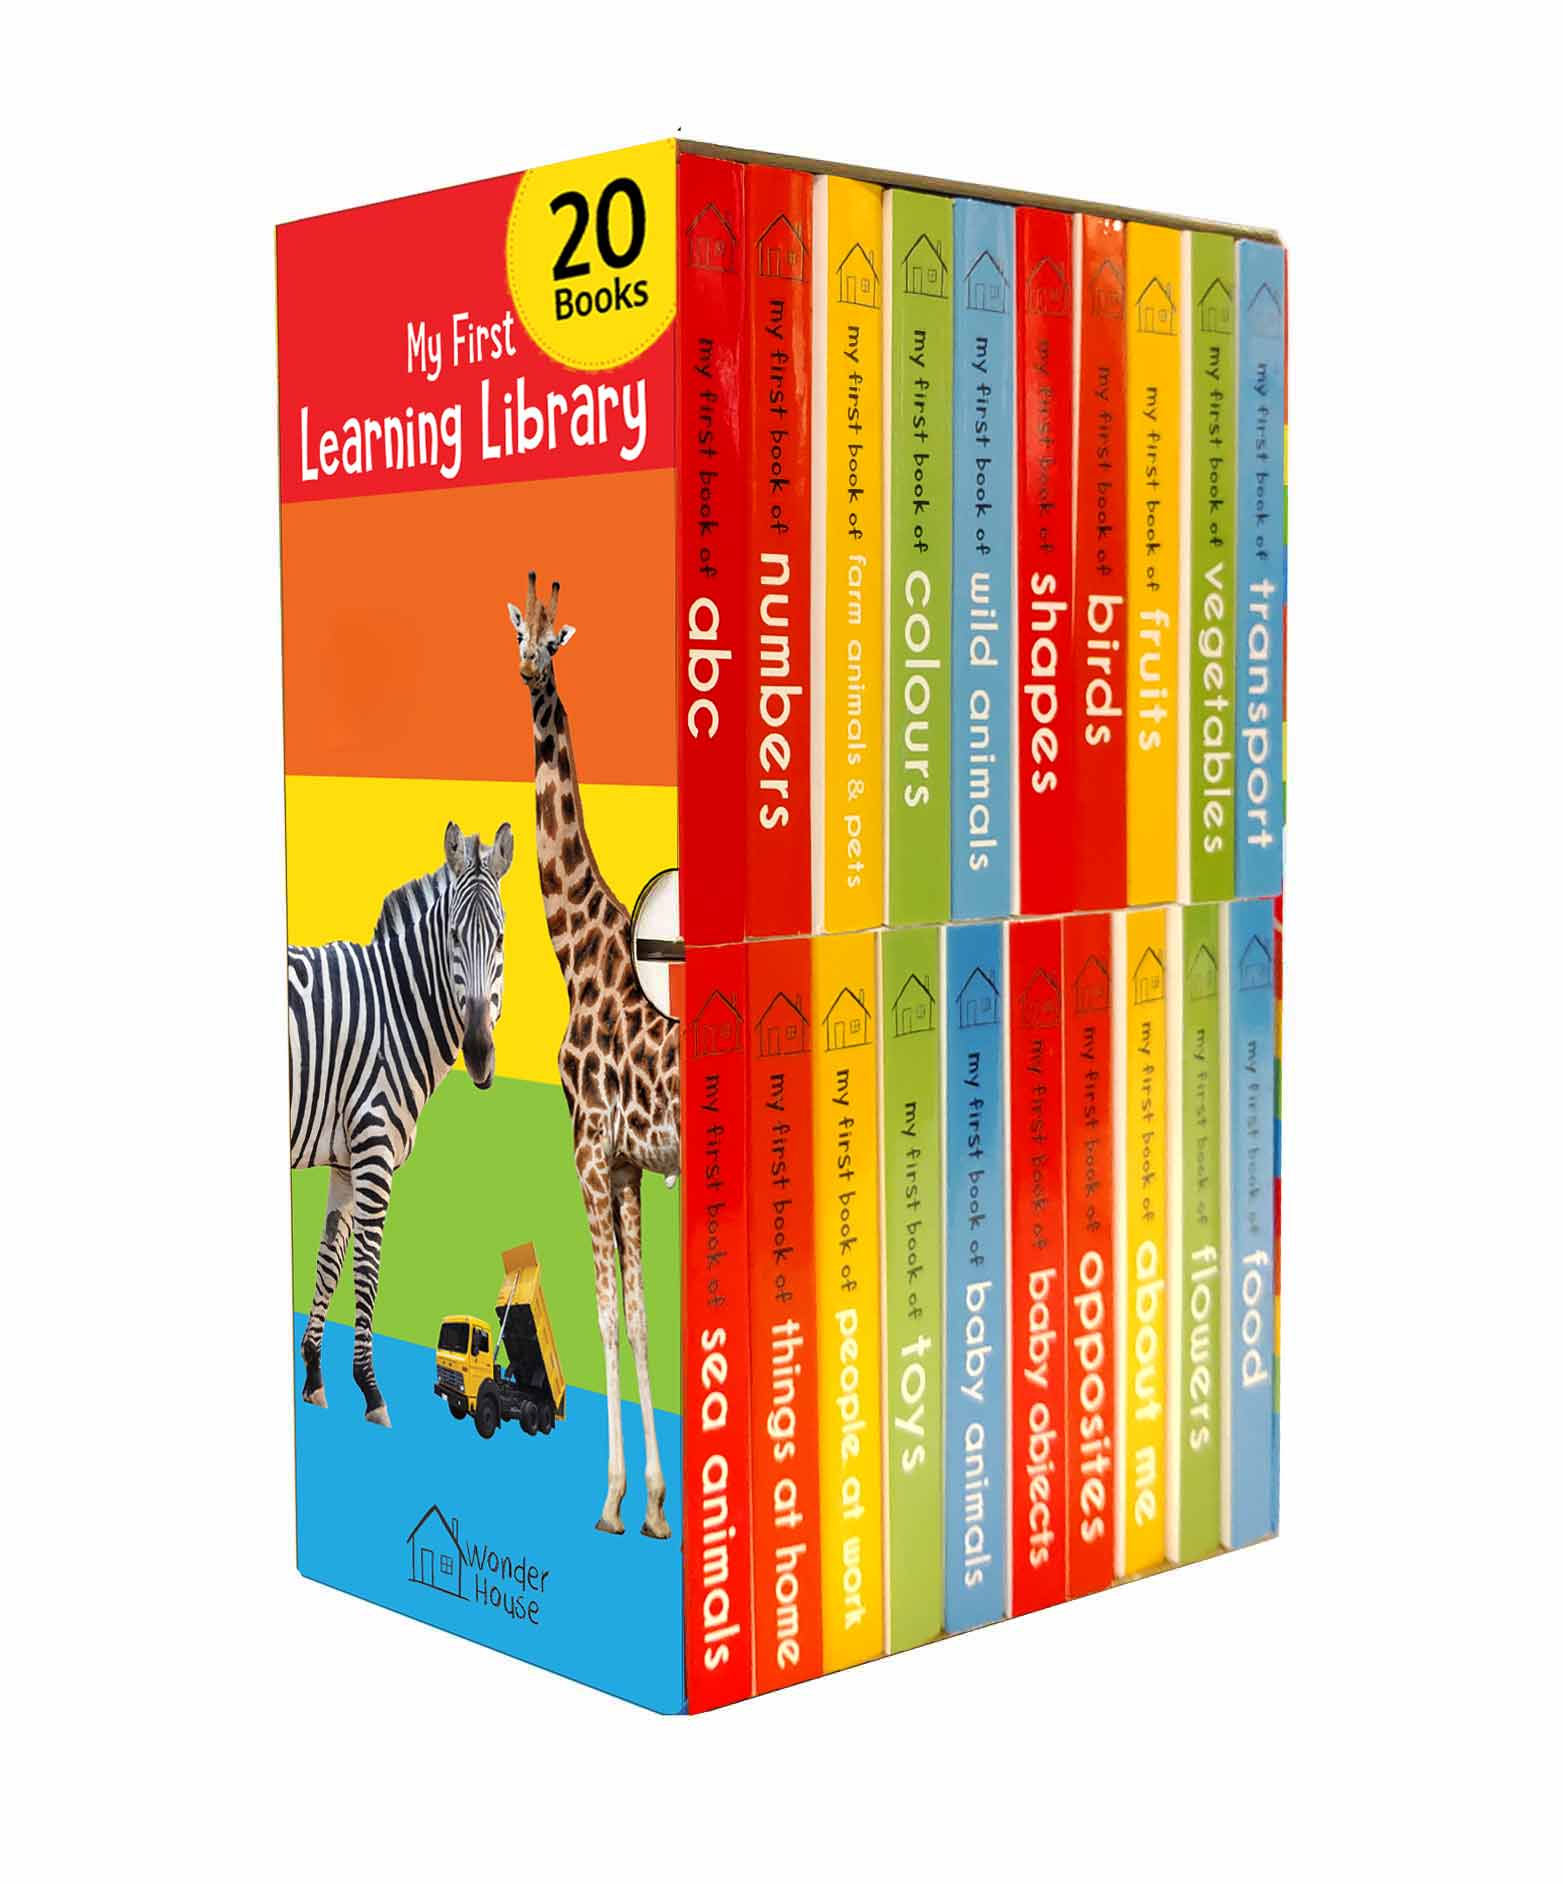 My First Learning Library: Boxset of 20 Board Books for Kids (Vertical Design)